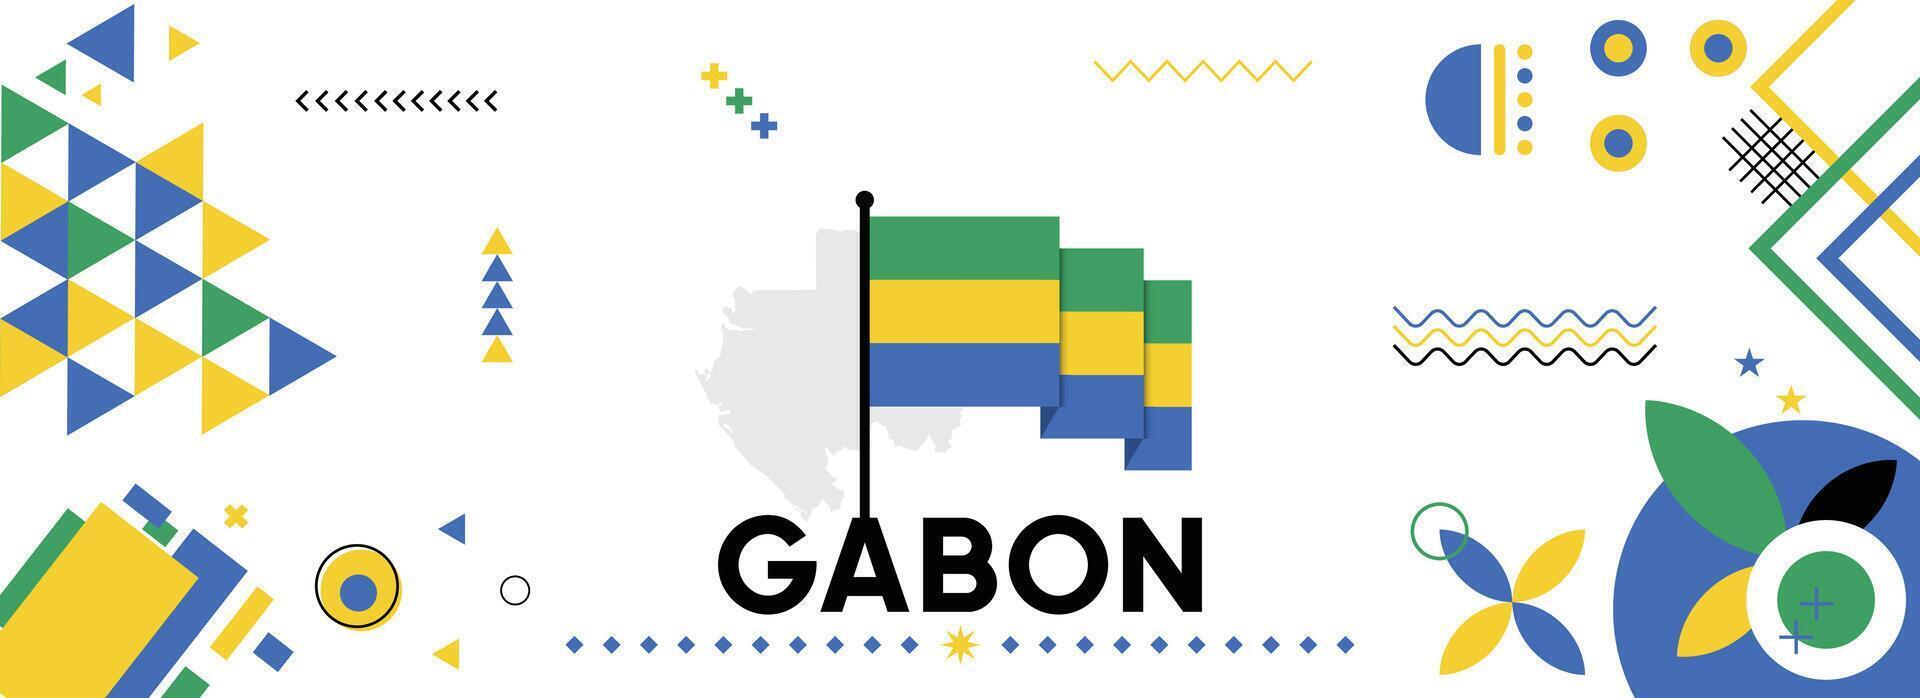 Gabon national or independence day banner for country celebration. Flag and map of Gabon with raised fists. Modern retro design with typorgaphy abstract geometric icons. Vector illustration